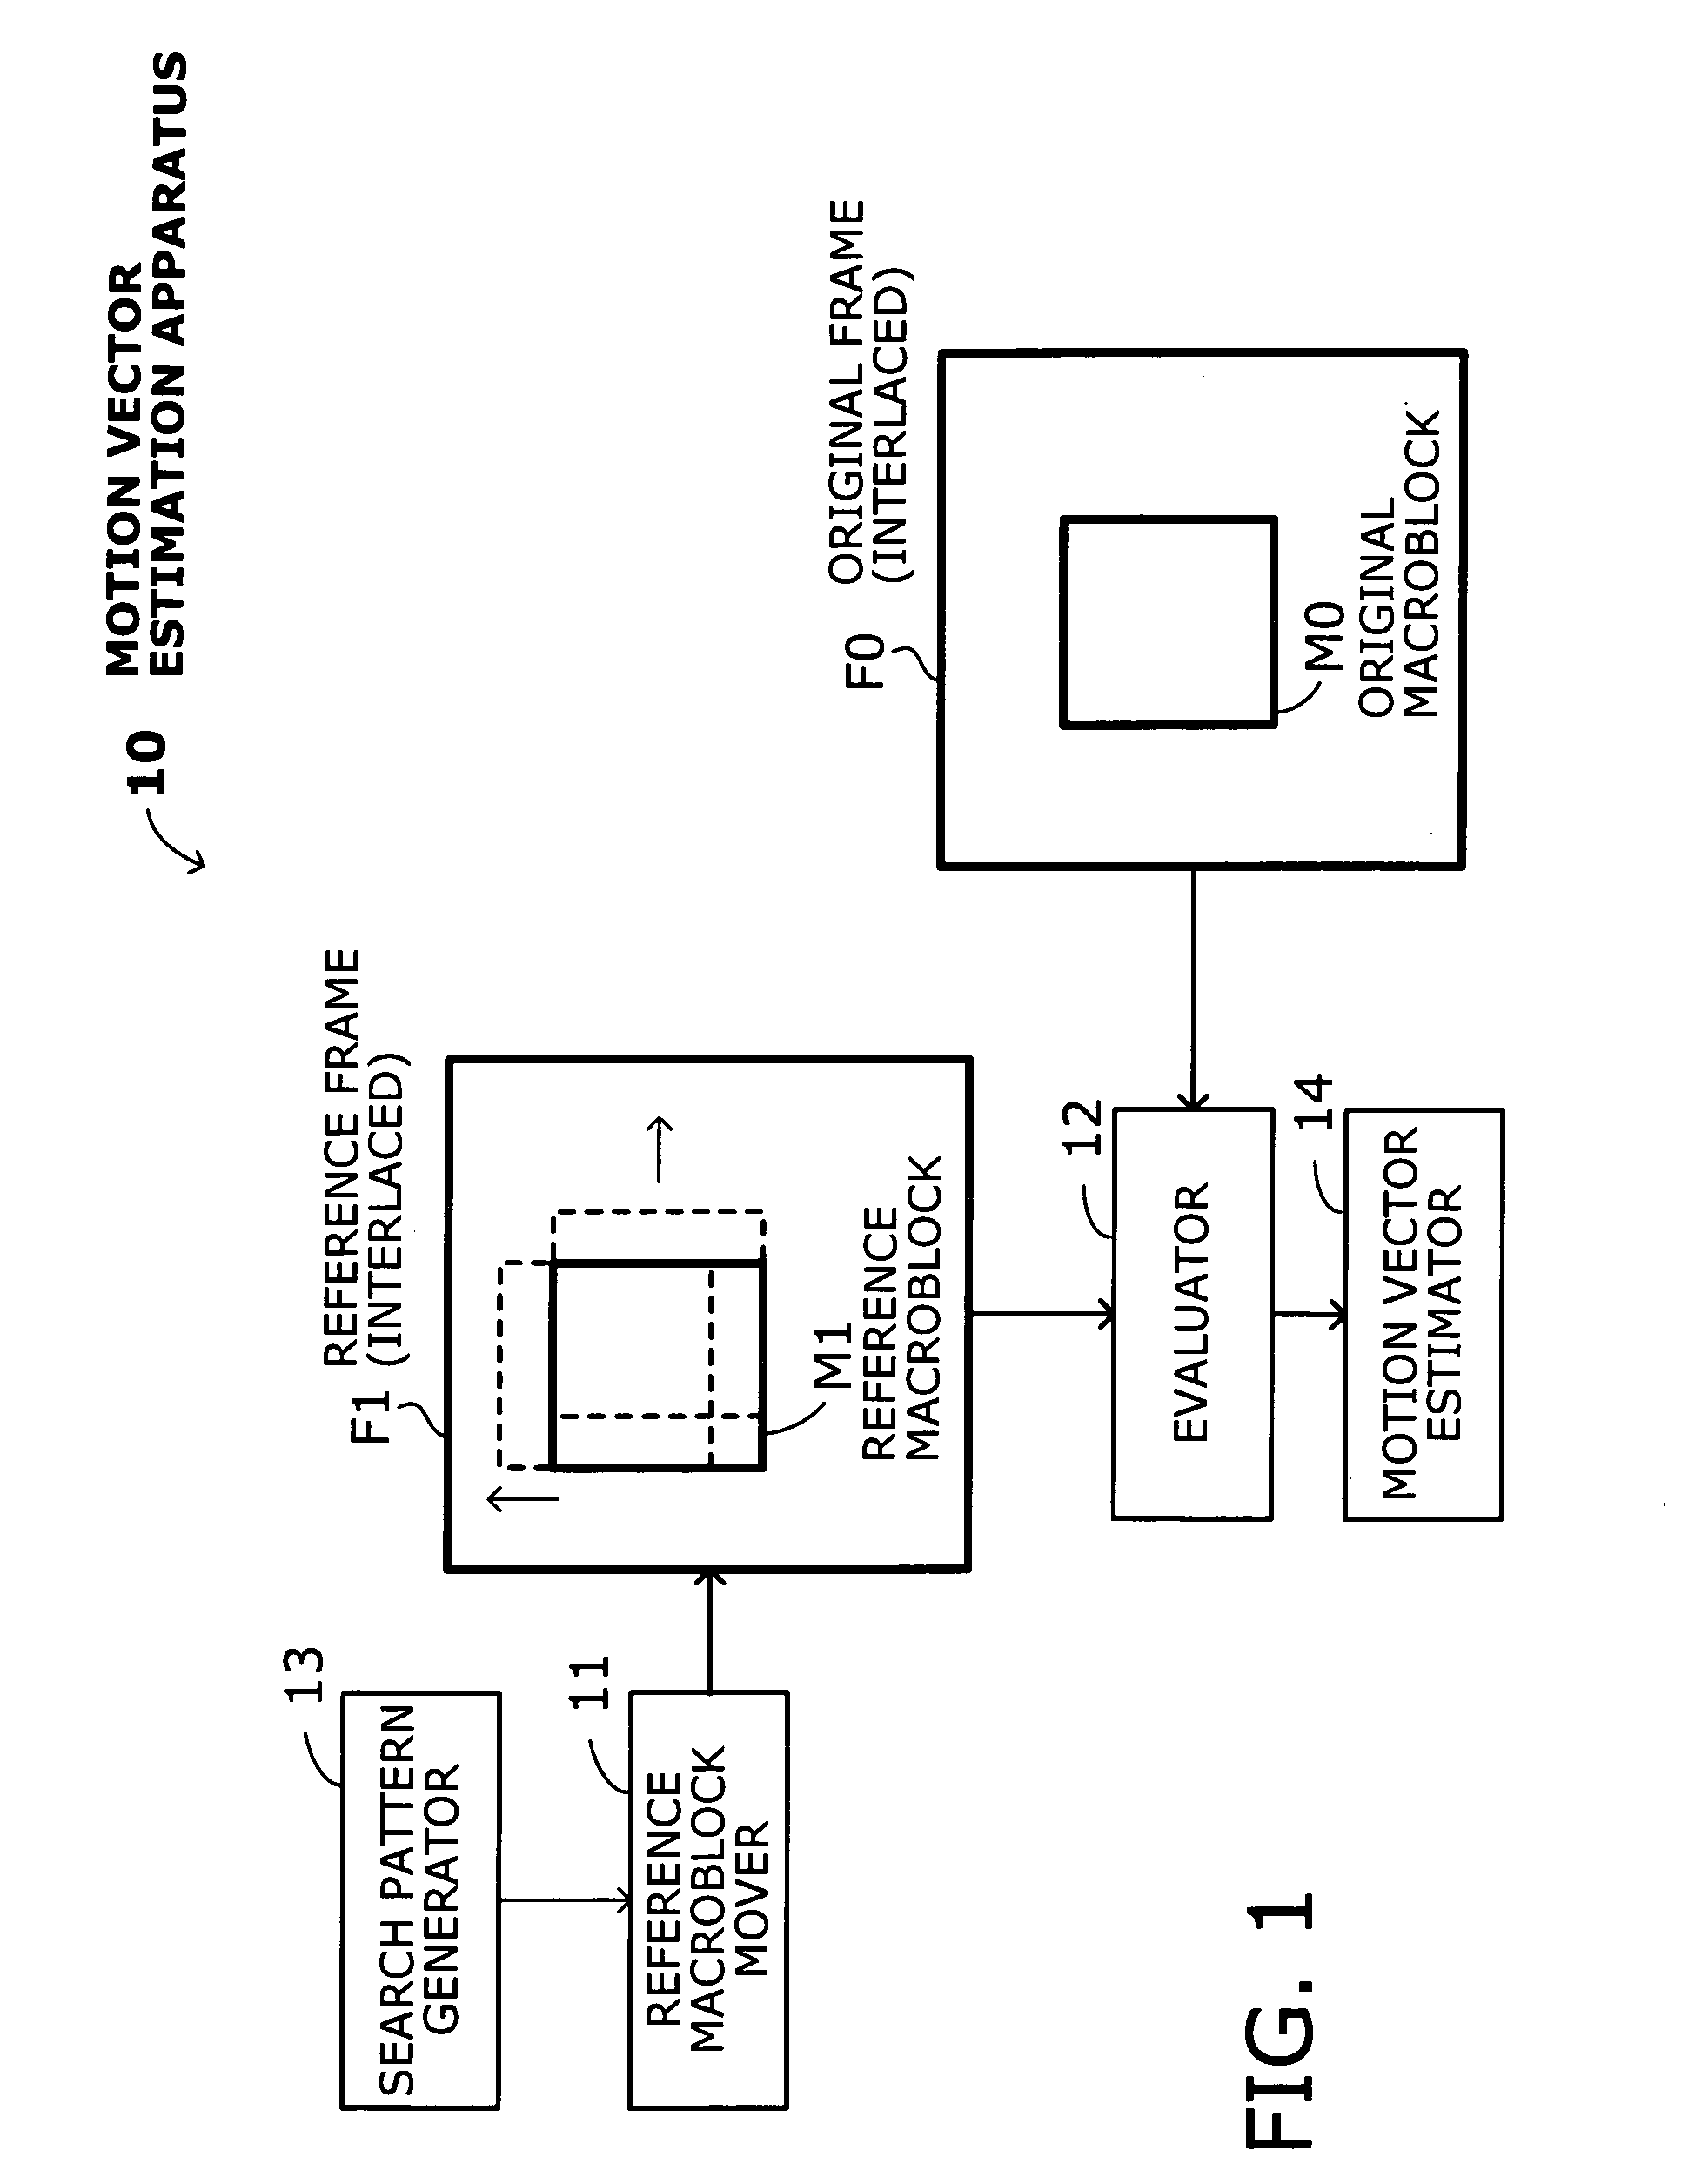 Apparatus for estimating motion vectors with extended search movement of reference macroblock